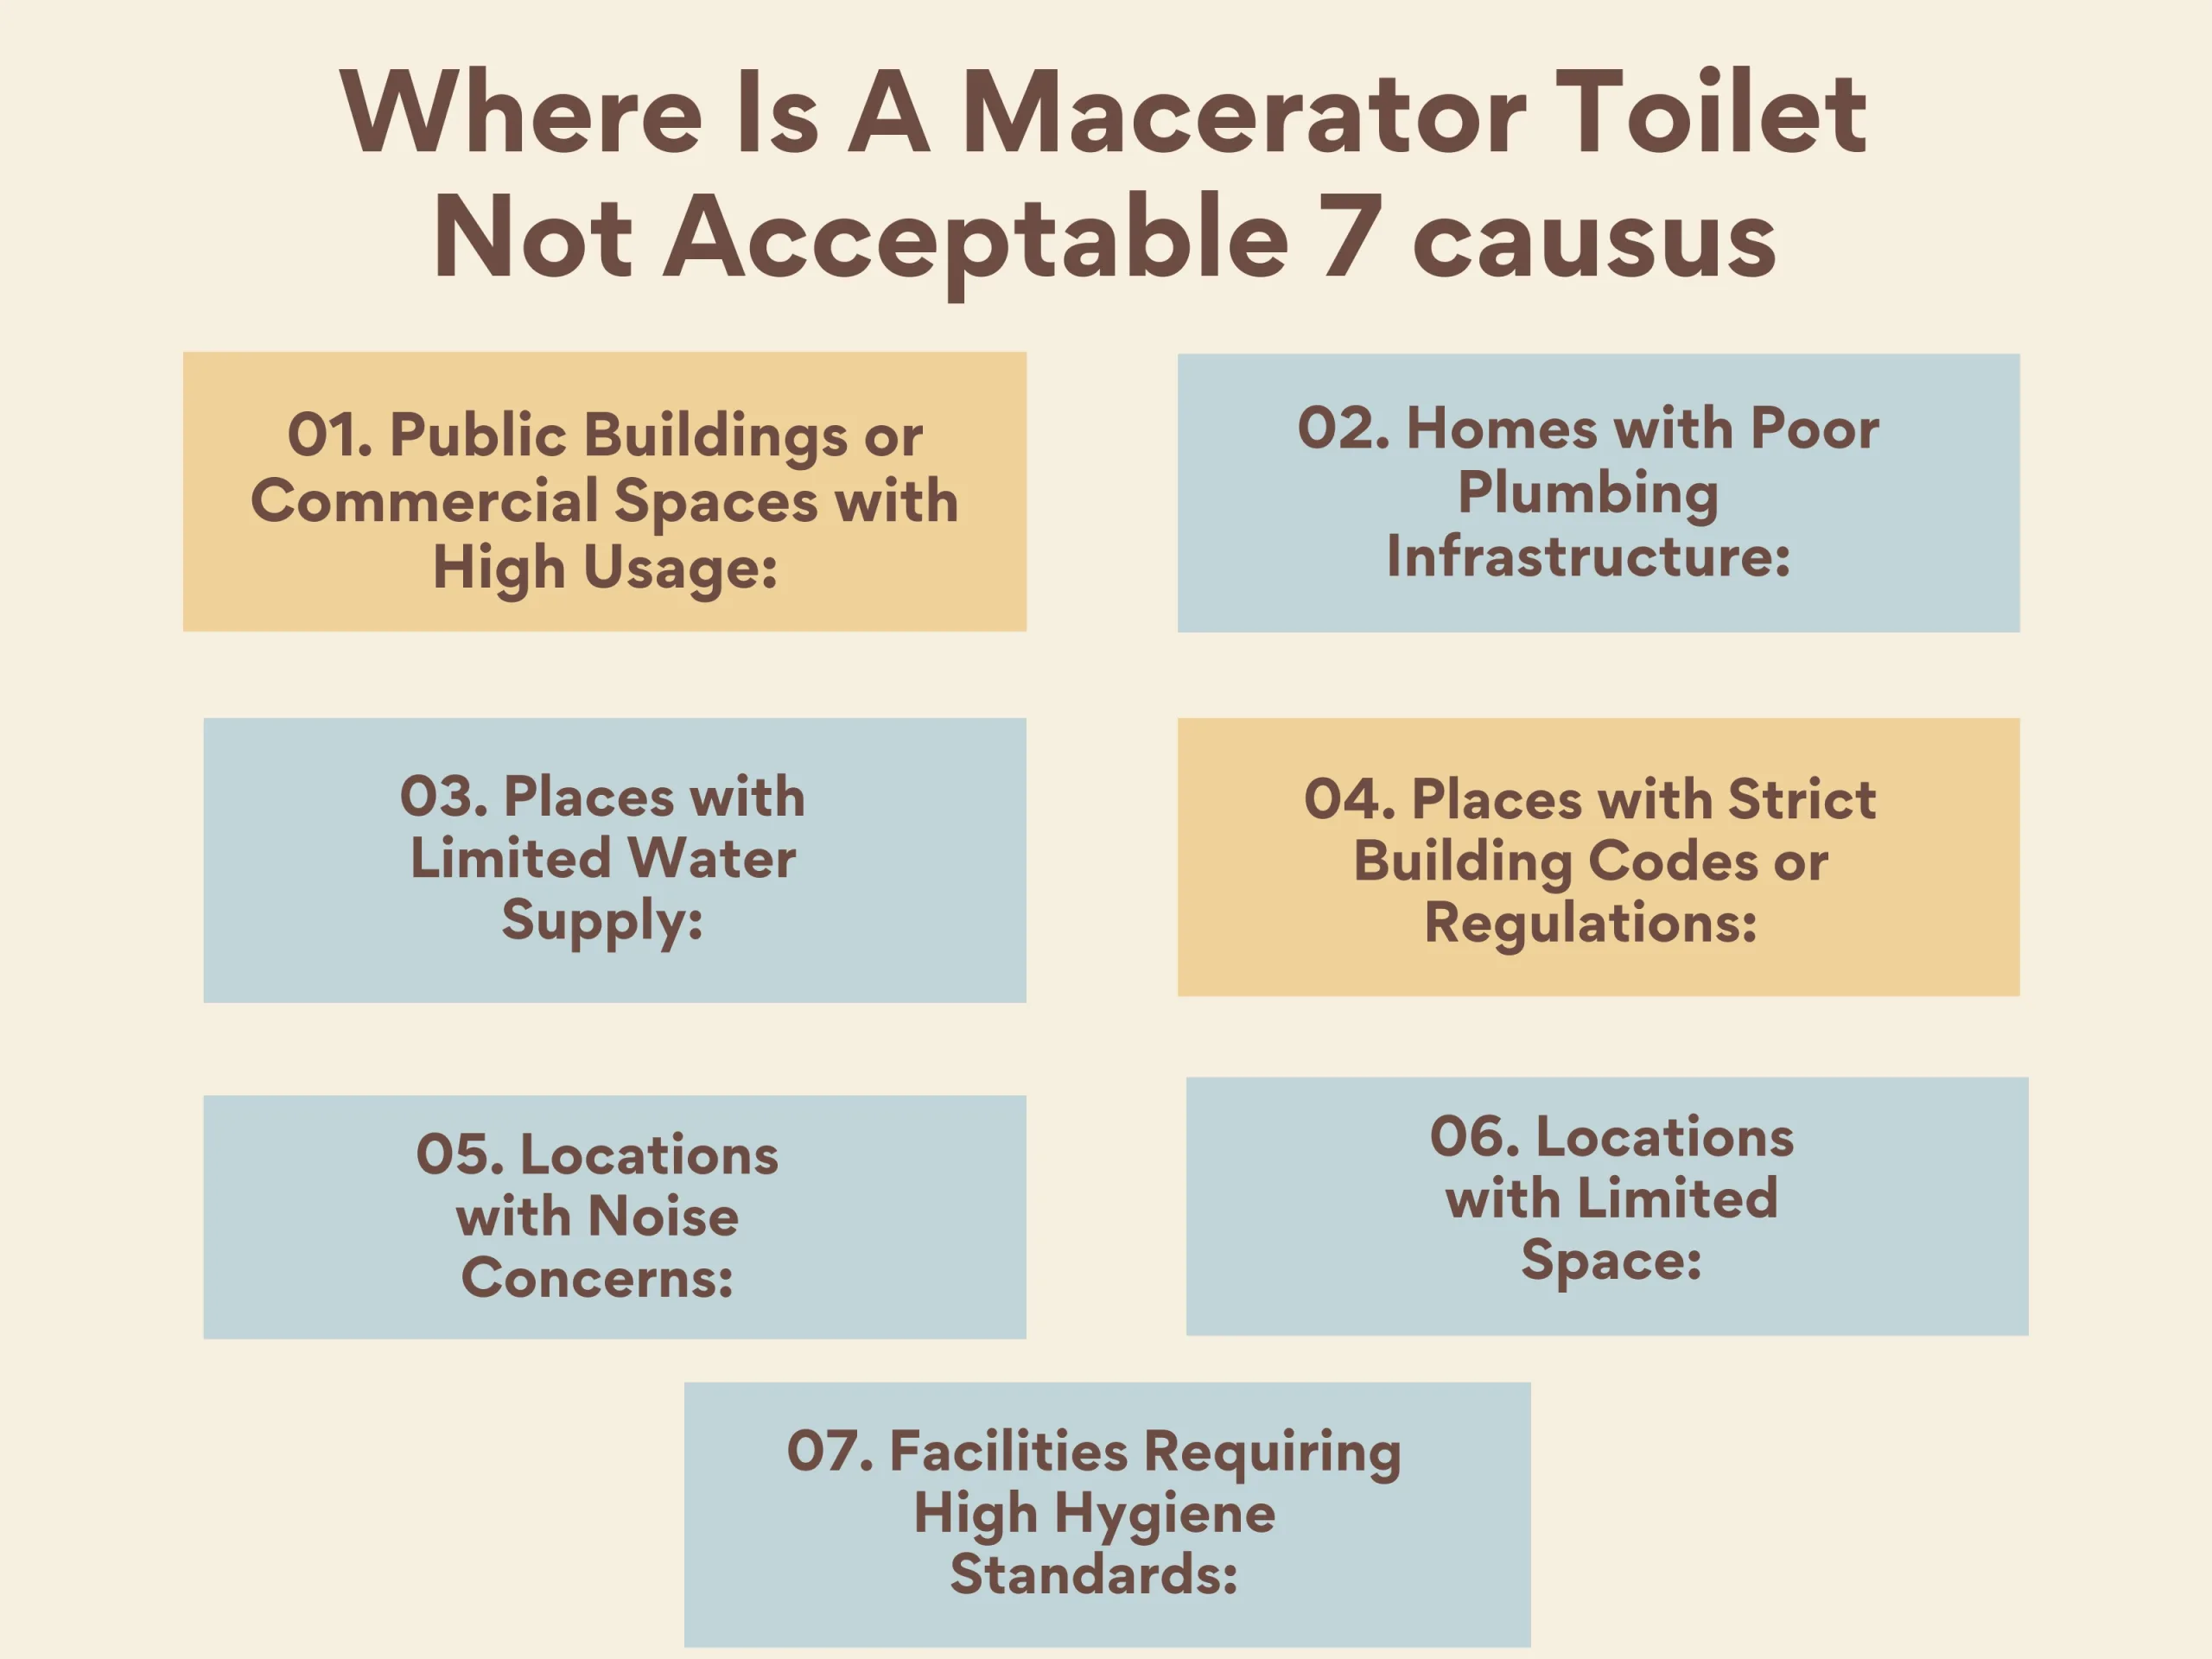 Where Is A Macerator Toilet Not Acceptable